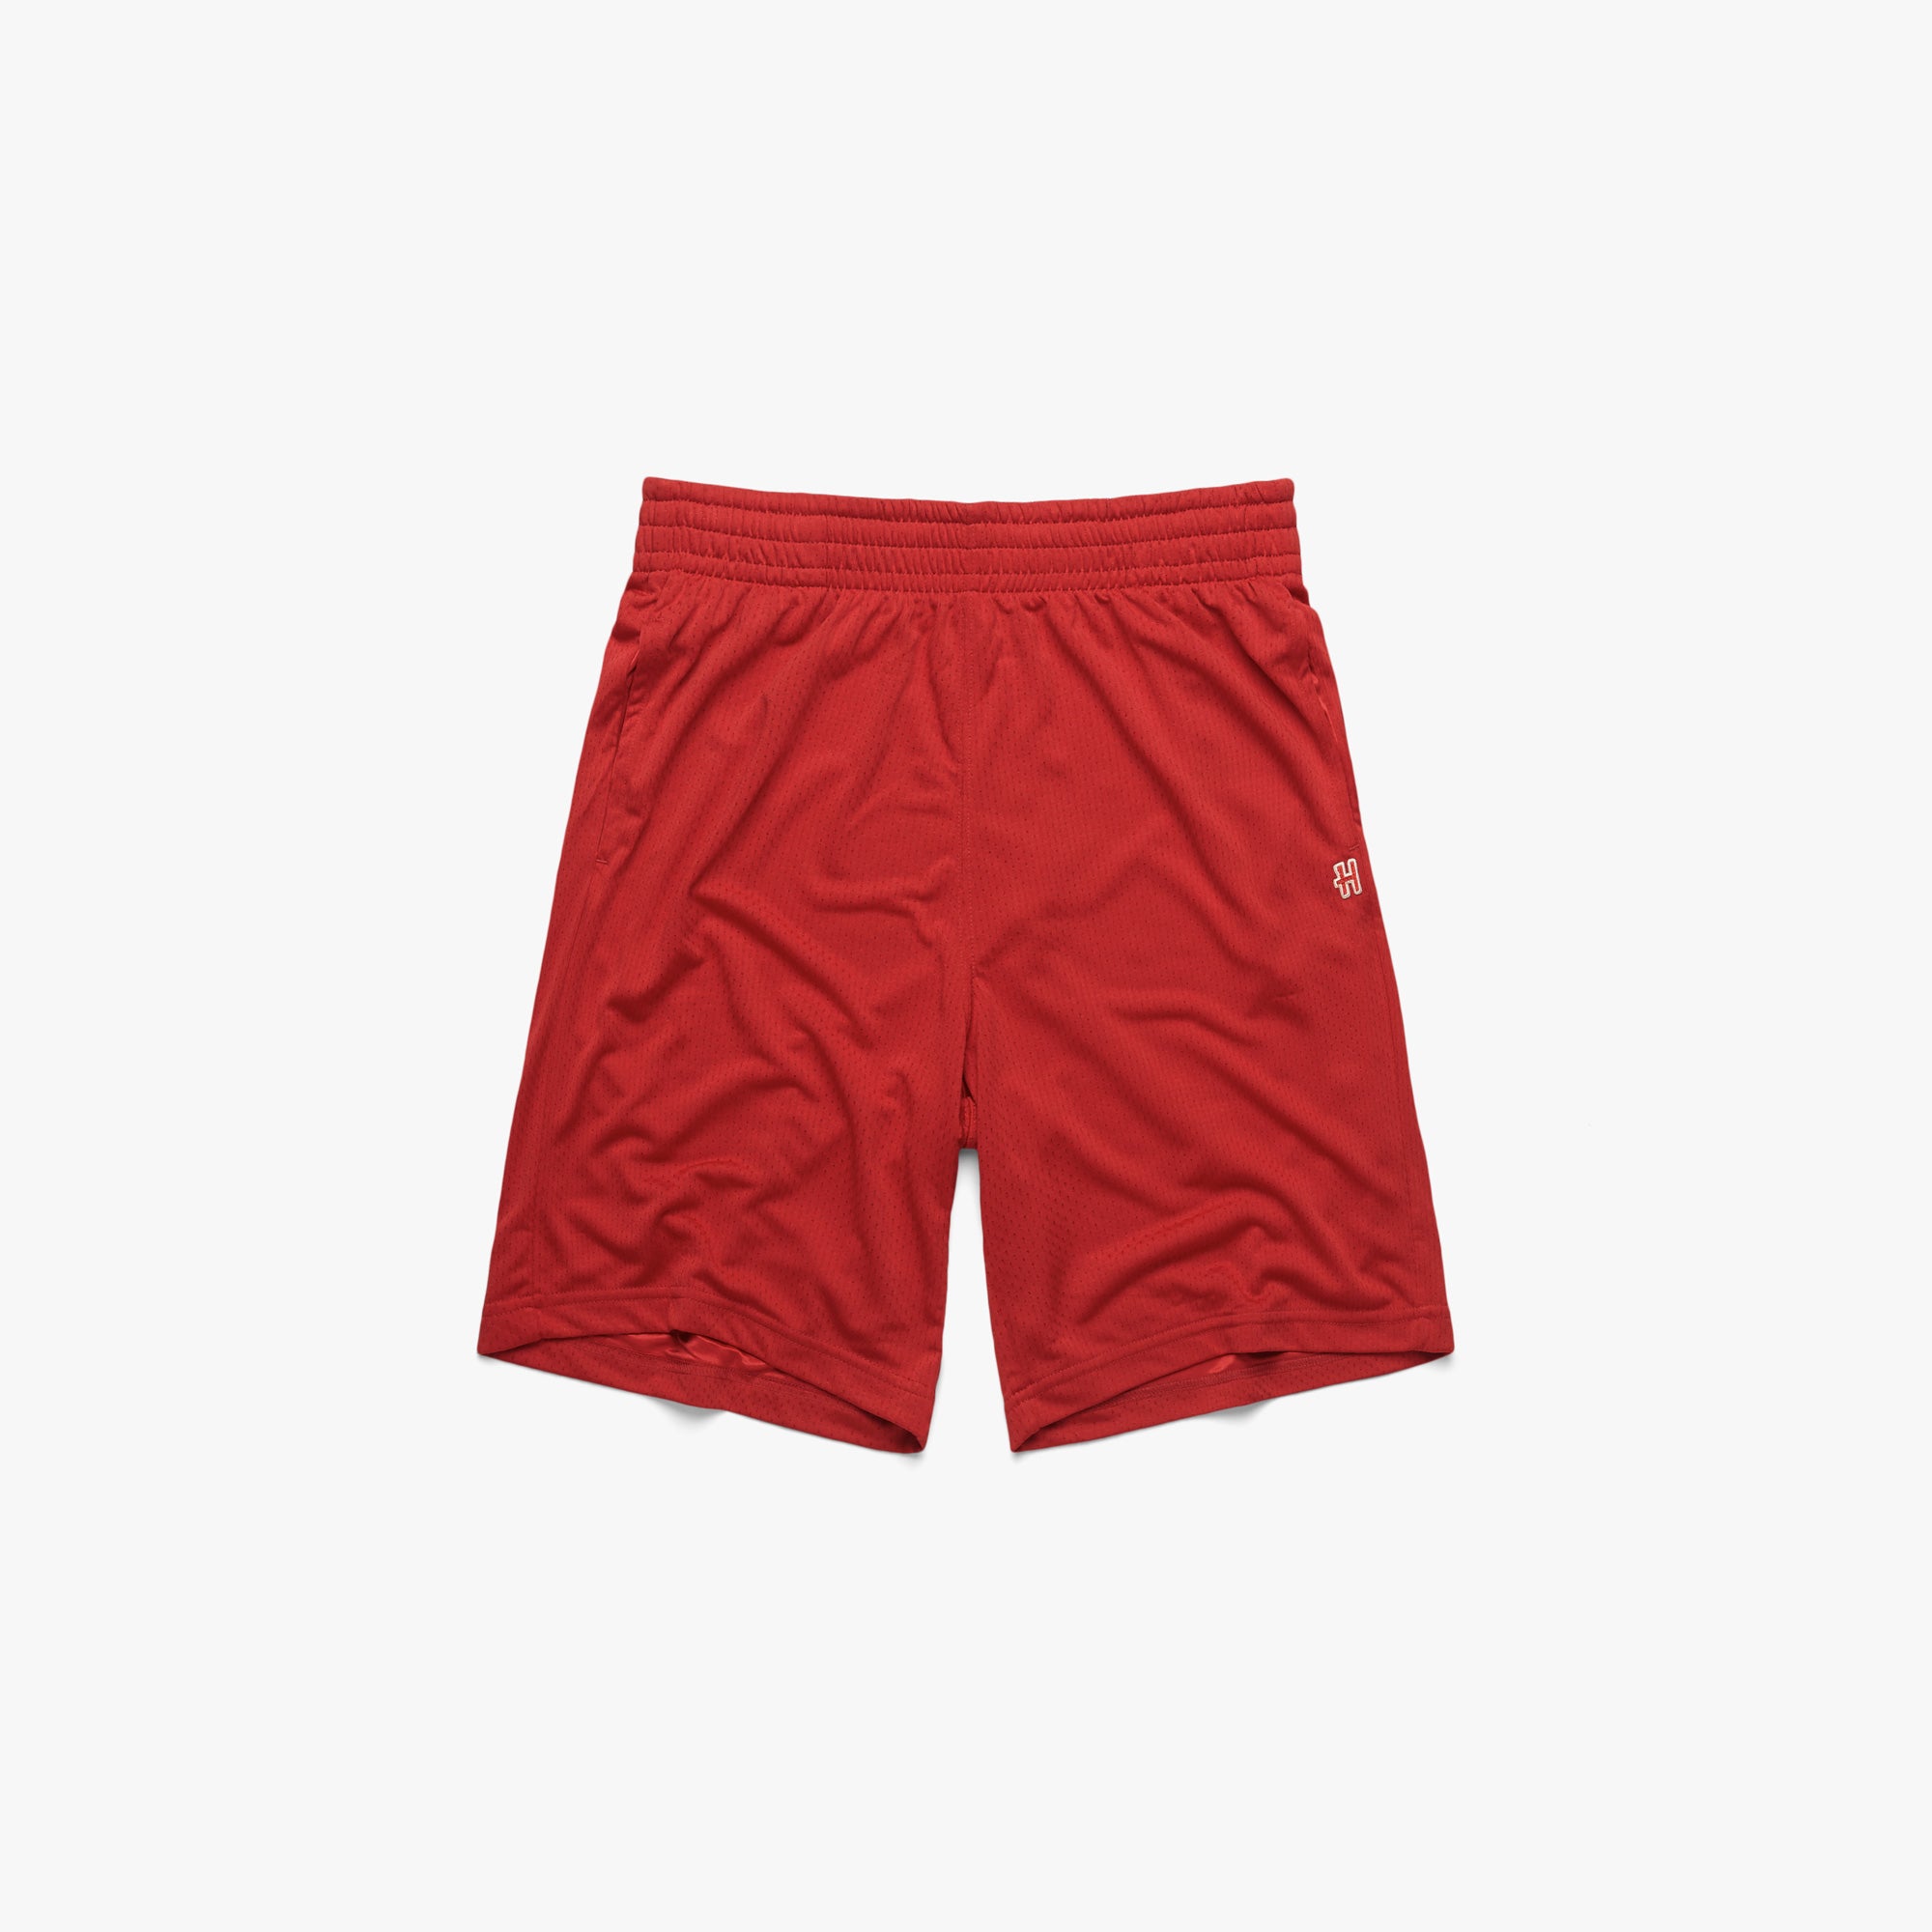 HOMAGE Go-To Sweat Shorts Essential Blank Fleece Shorts